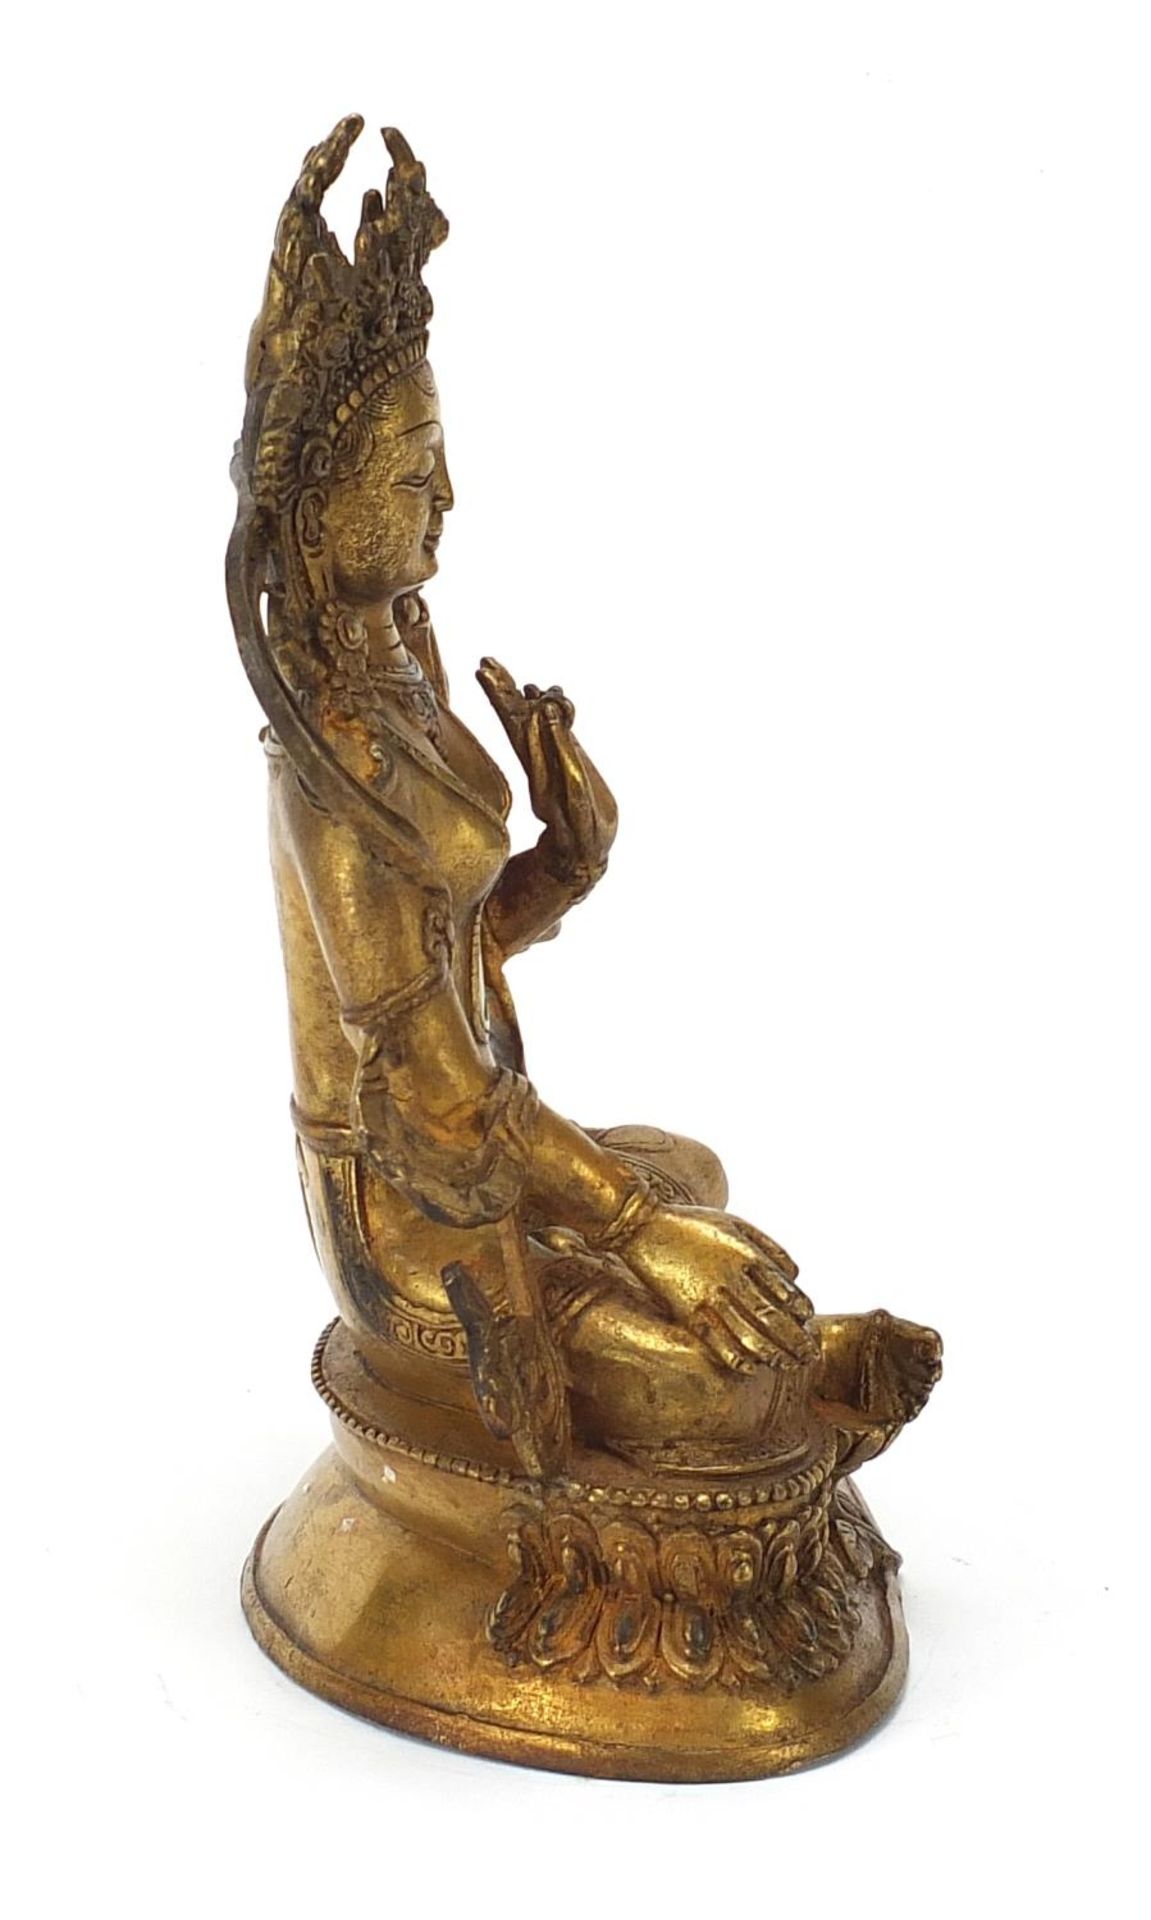 Chino-Tibetan gilt bronze figure of seated Buddha, 22cm high : For Further Condition Reports - Image 5 of 7